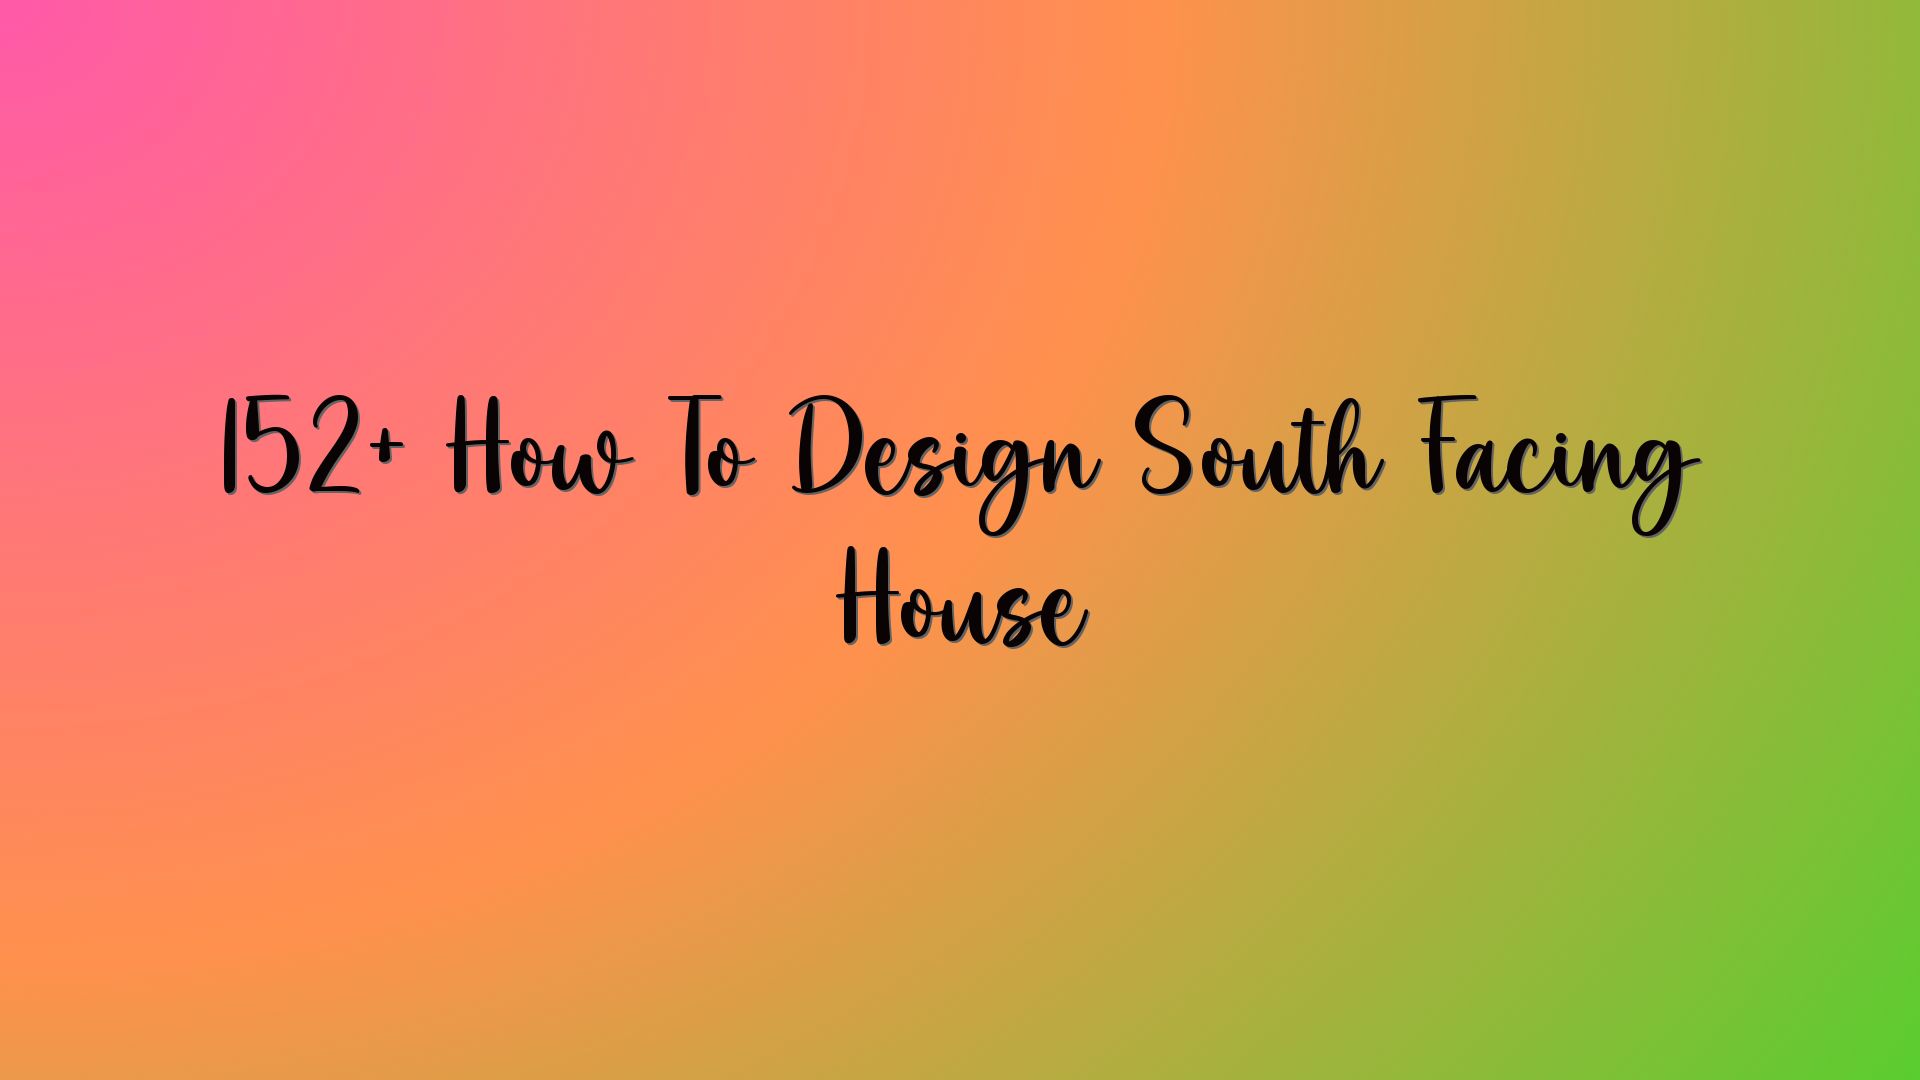 152+ How To Design South Facing House